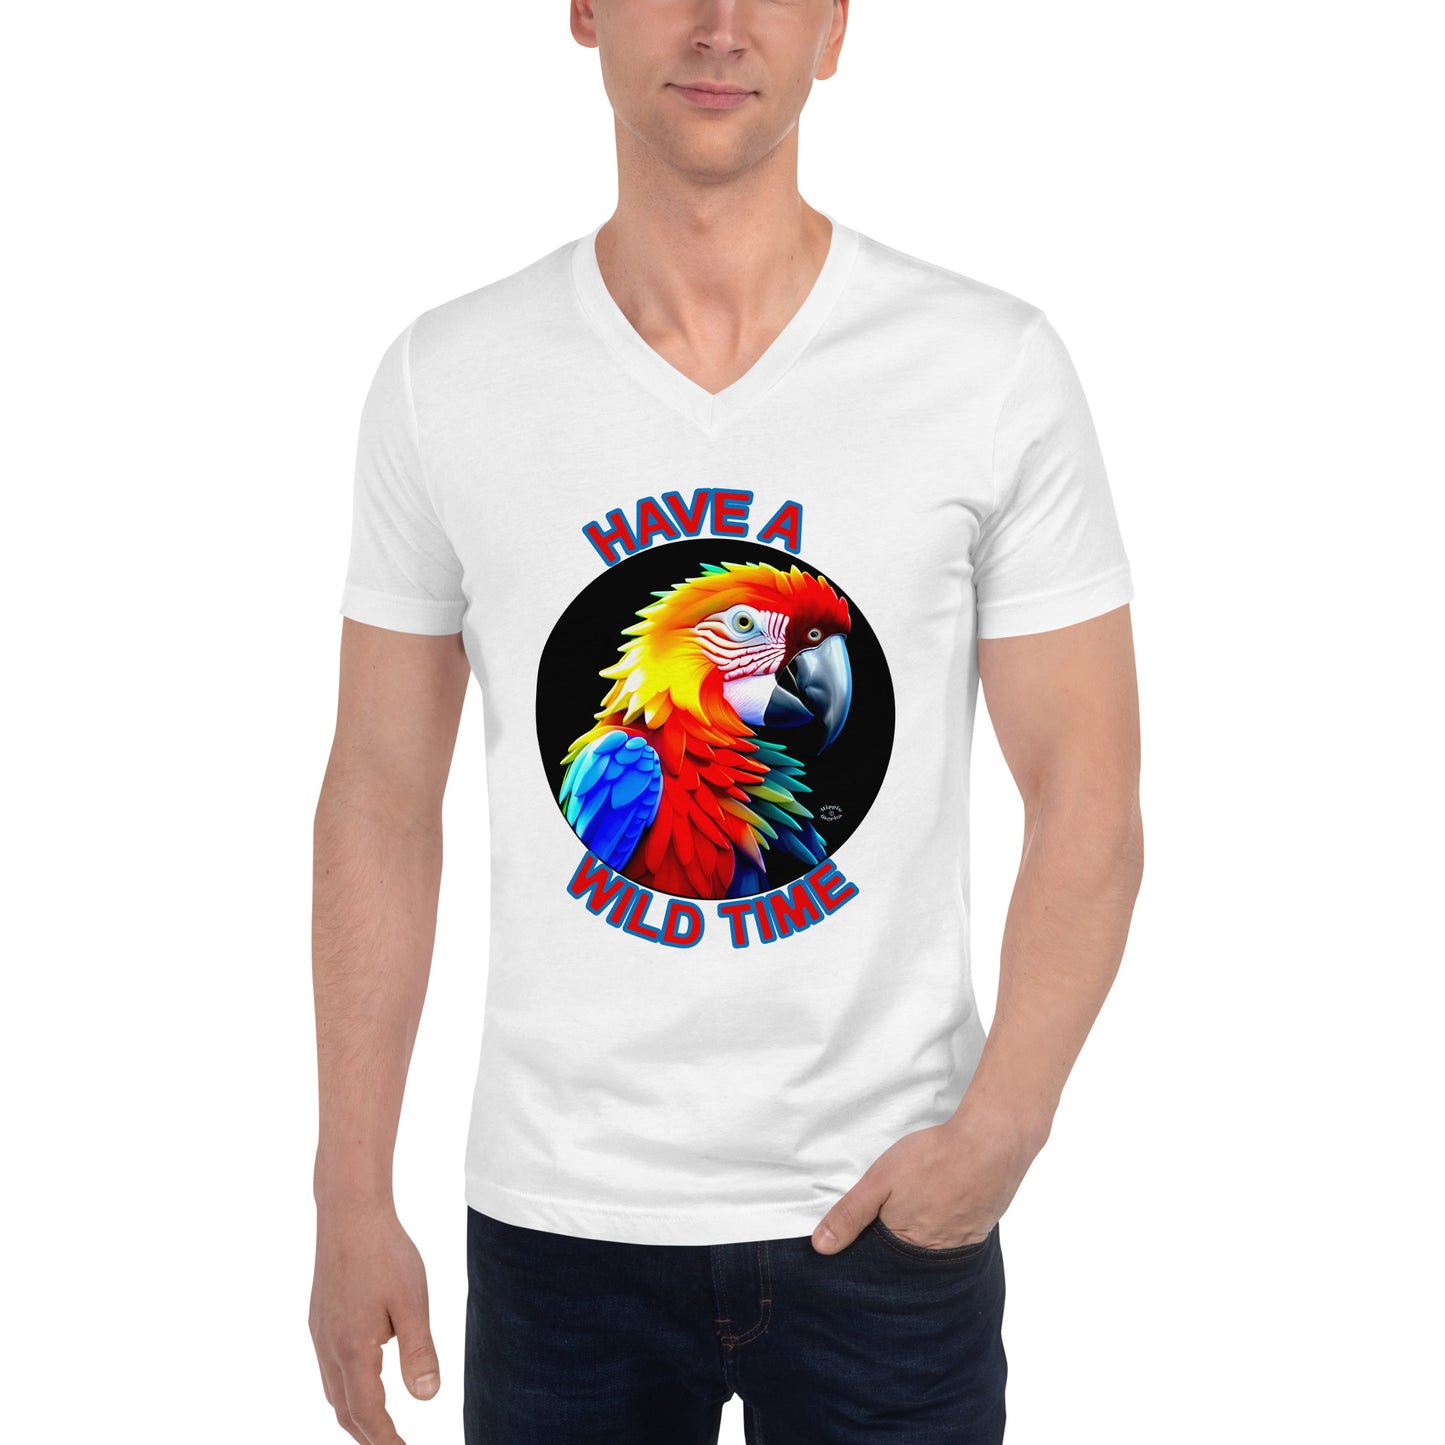 A picture of a man wearing a tshirt with the picture of a bright and colorful rainbow macaw parrot and the text HAVE A WILD TIME - white front